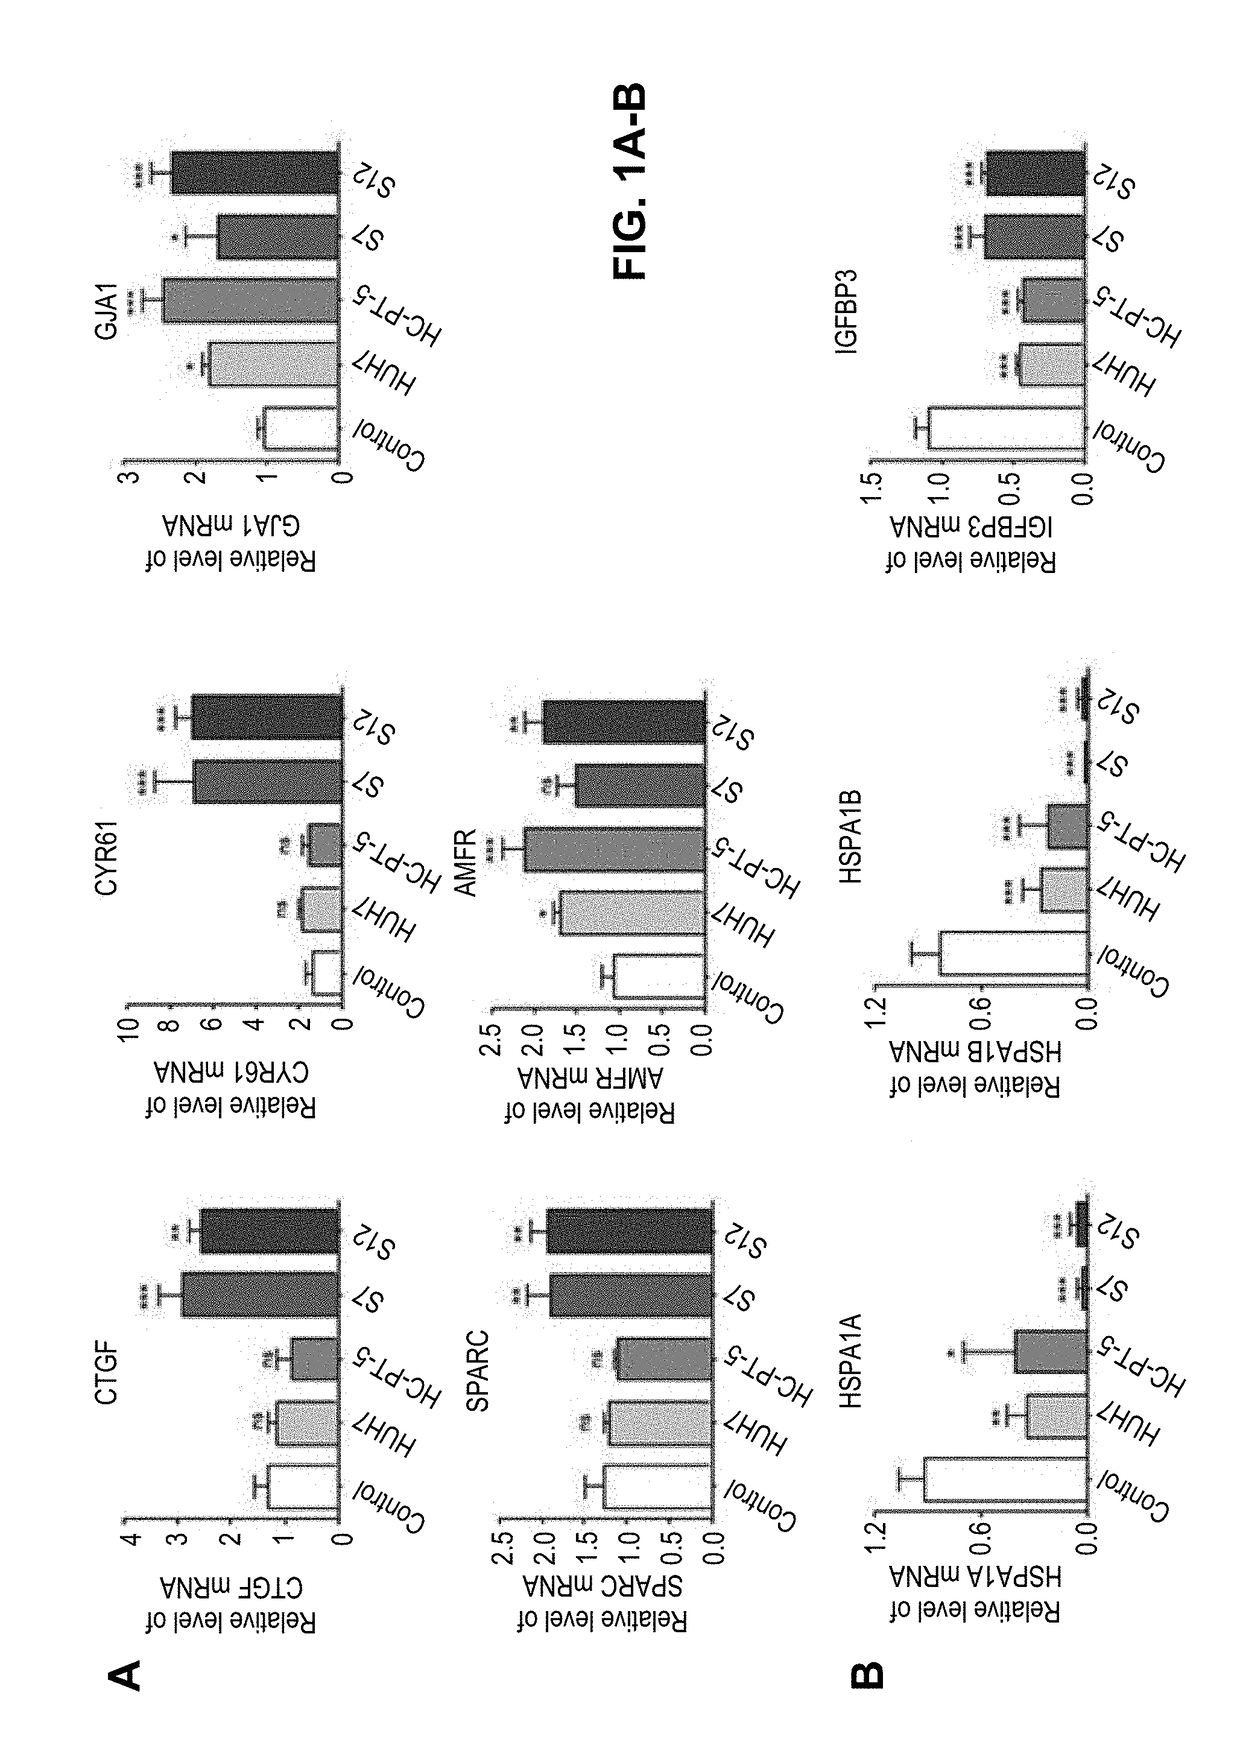 Compositions and methods for increasing mesenchymal stromal cell migration to tumors